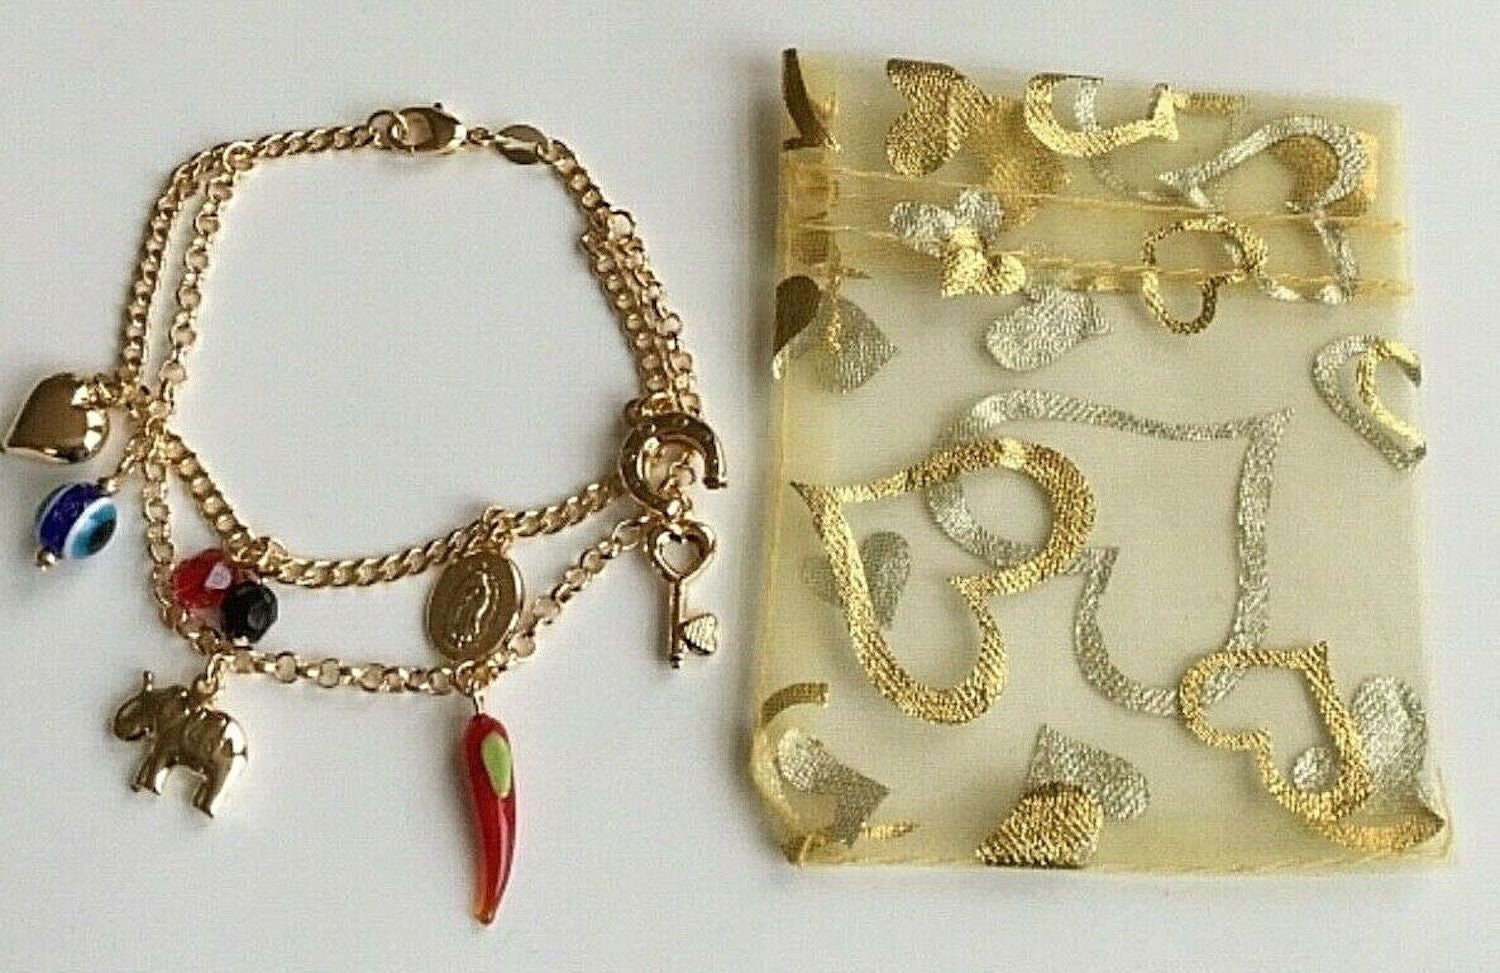 24K Gold Filled Charms for Necklace Bracelet Earring Supply Gold Mahjong  Tile Charm Chinese Character Wealth Rich Amulet Charm E-010 E-011 E-012